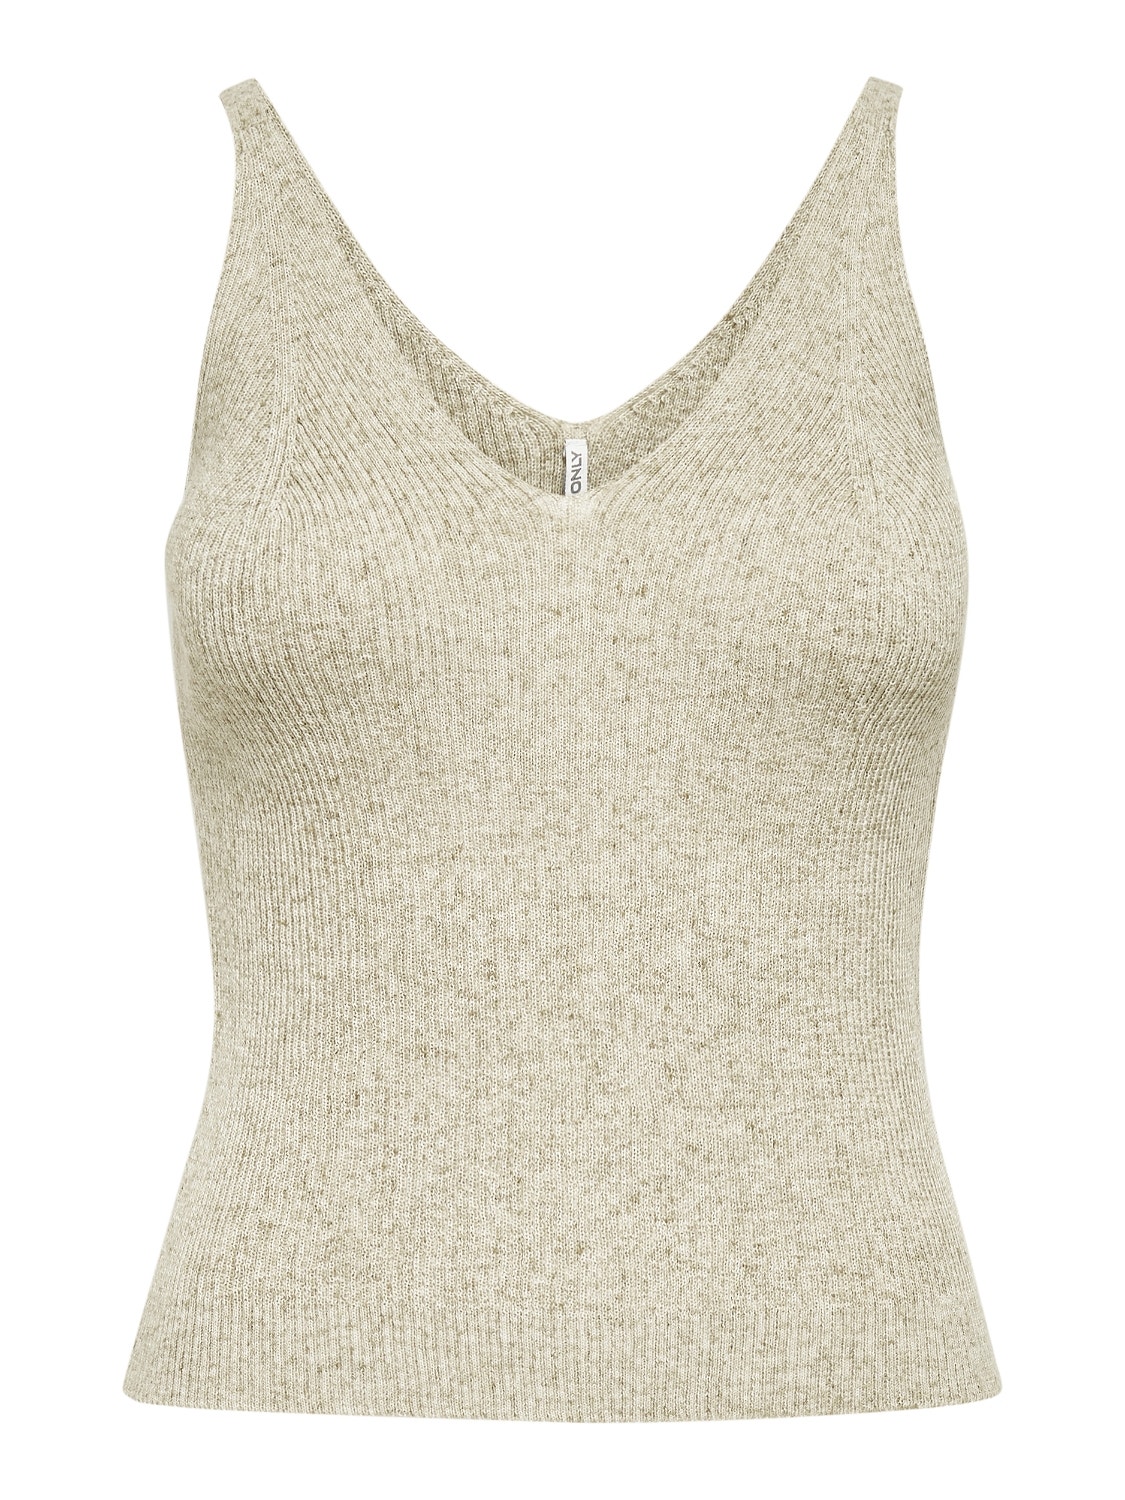 ONLY V-Hals Pullover -Pumice Stone - 15207059